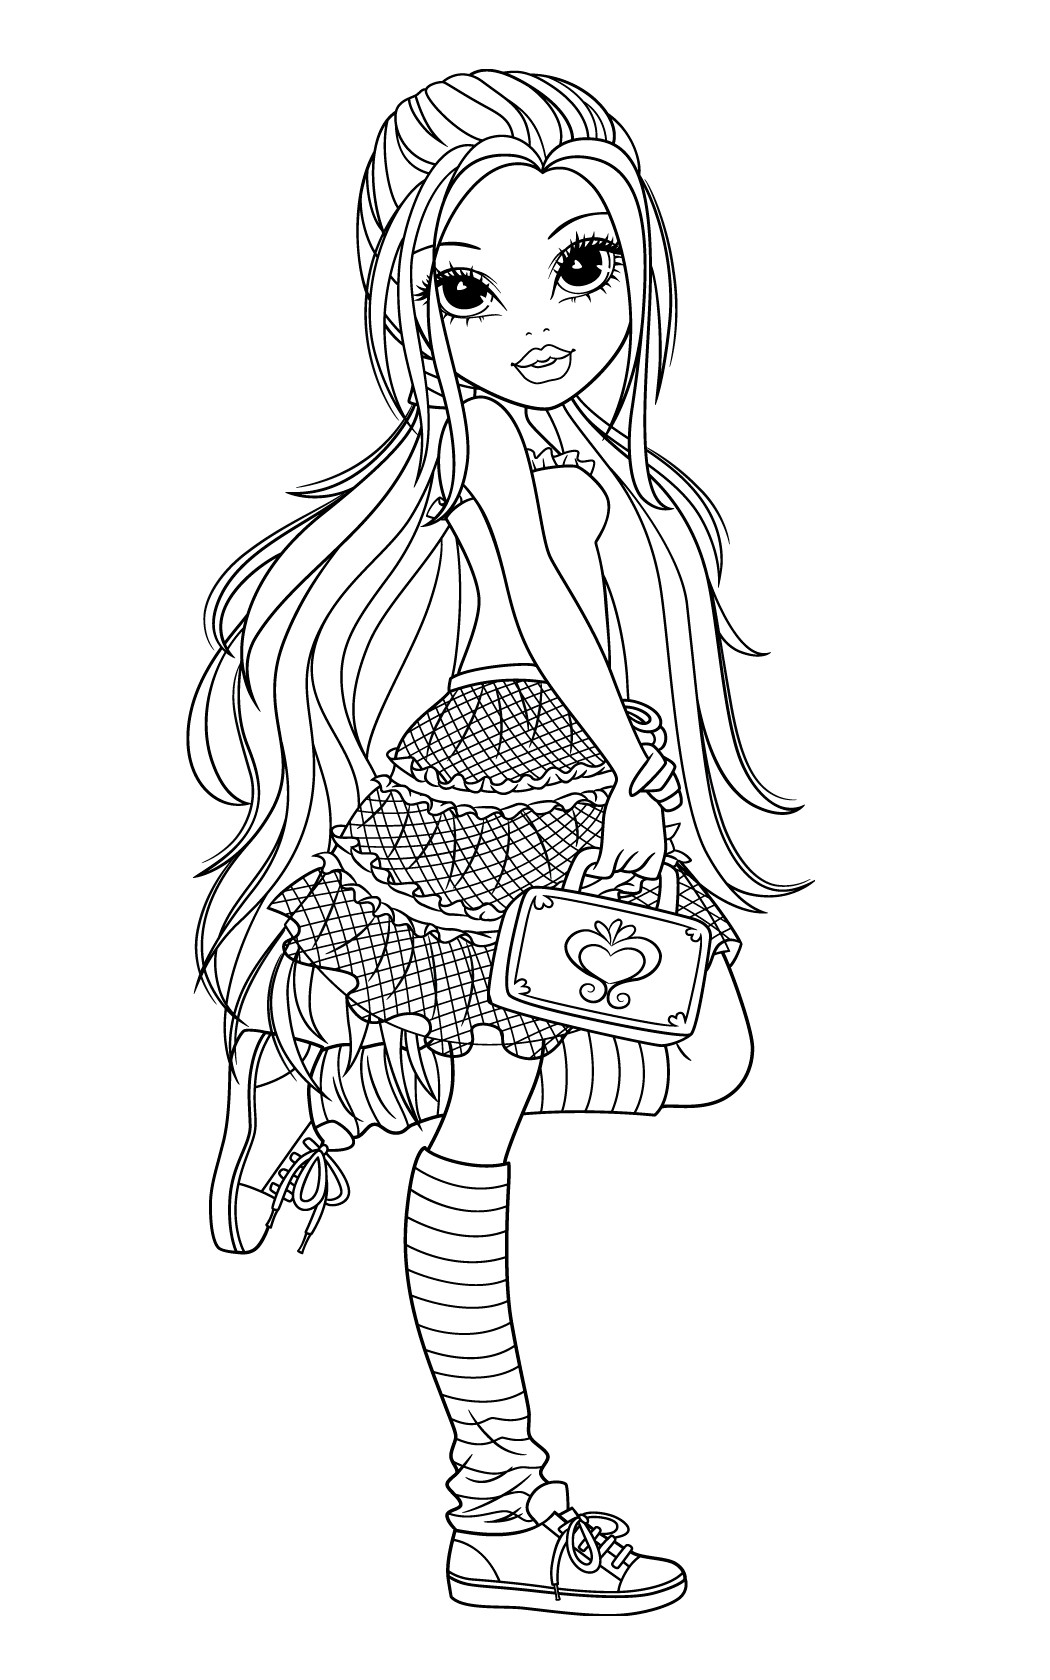 Printable Coloring Sheets For Girls
 New Moxie Girlz Coloring Pages will be added frequently so